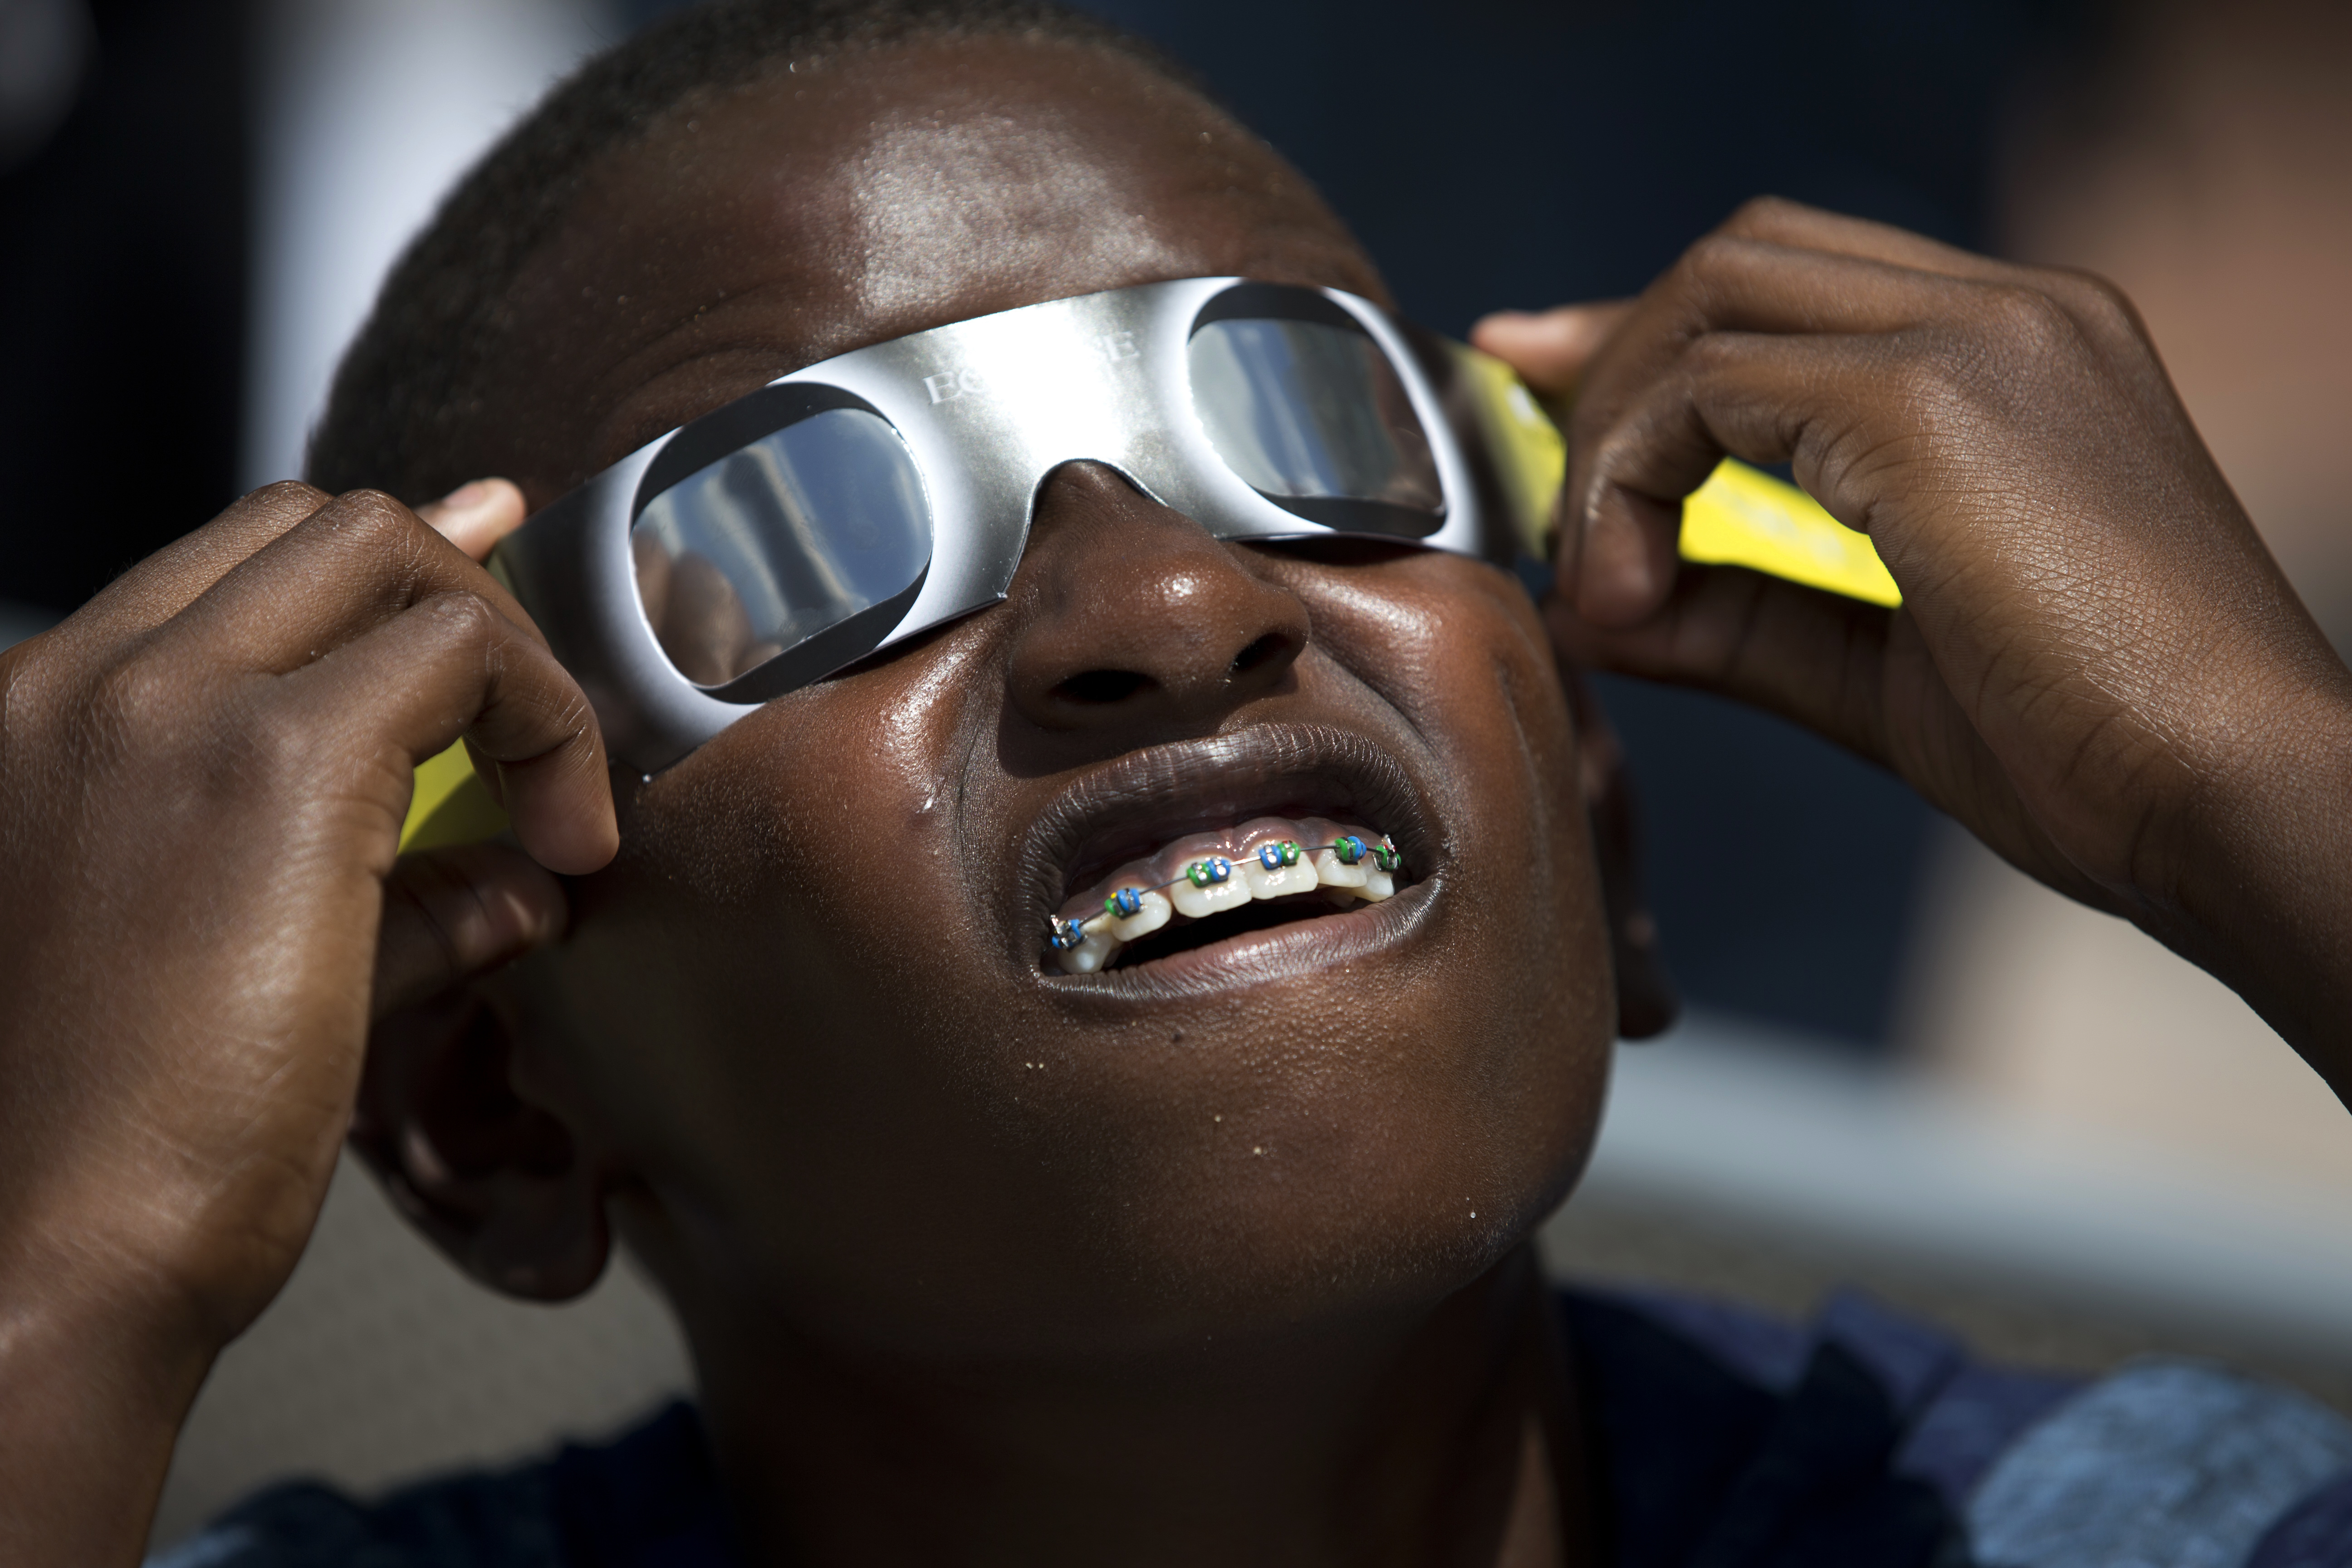 Excited for eclipse? See these safety tips first to make viewing